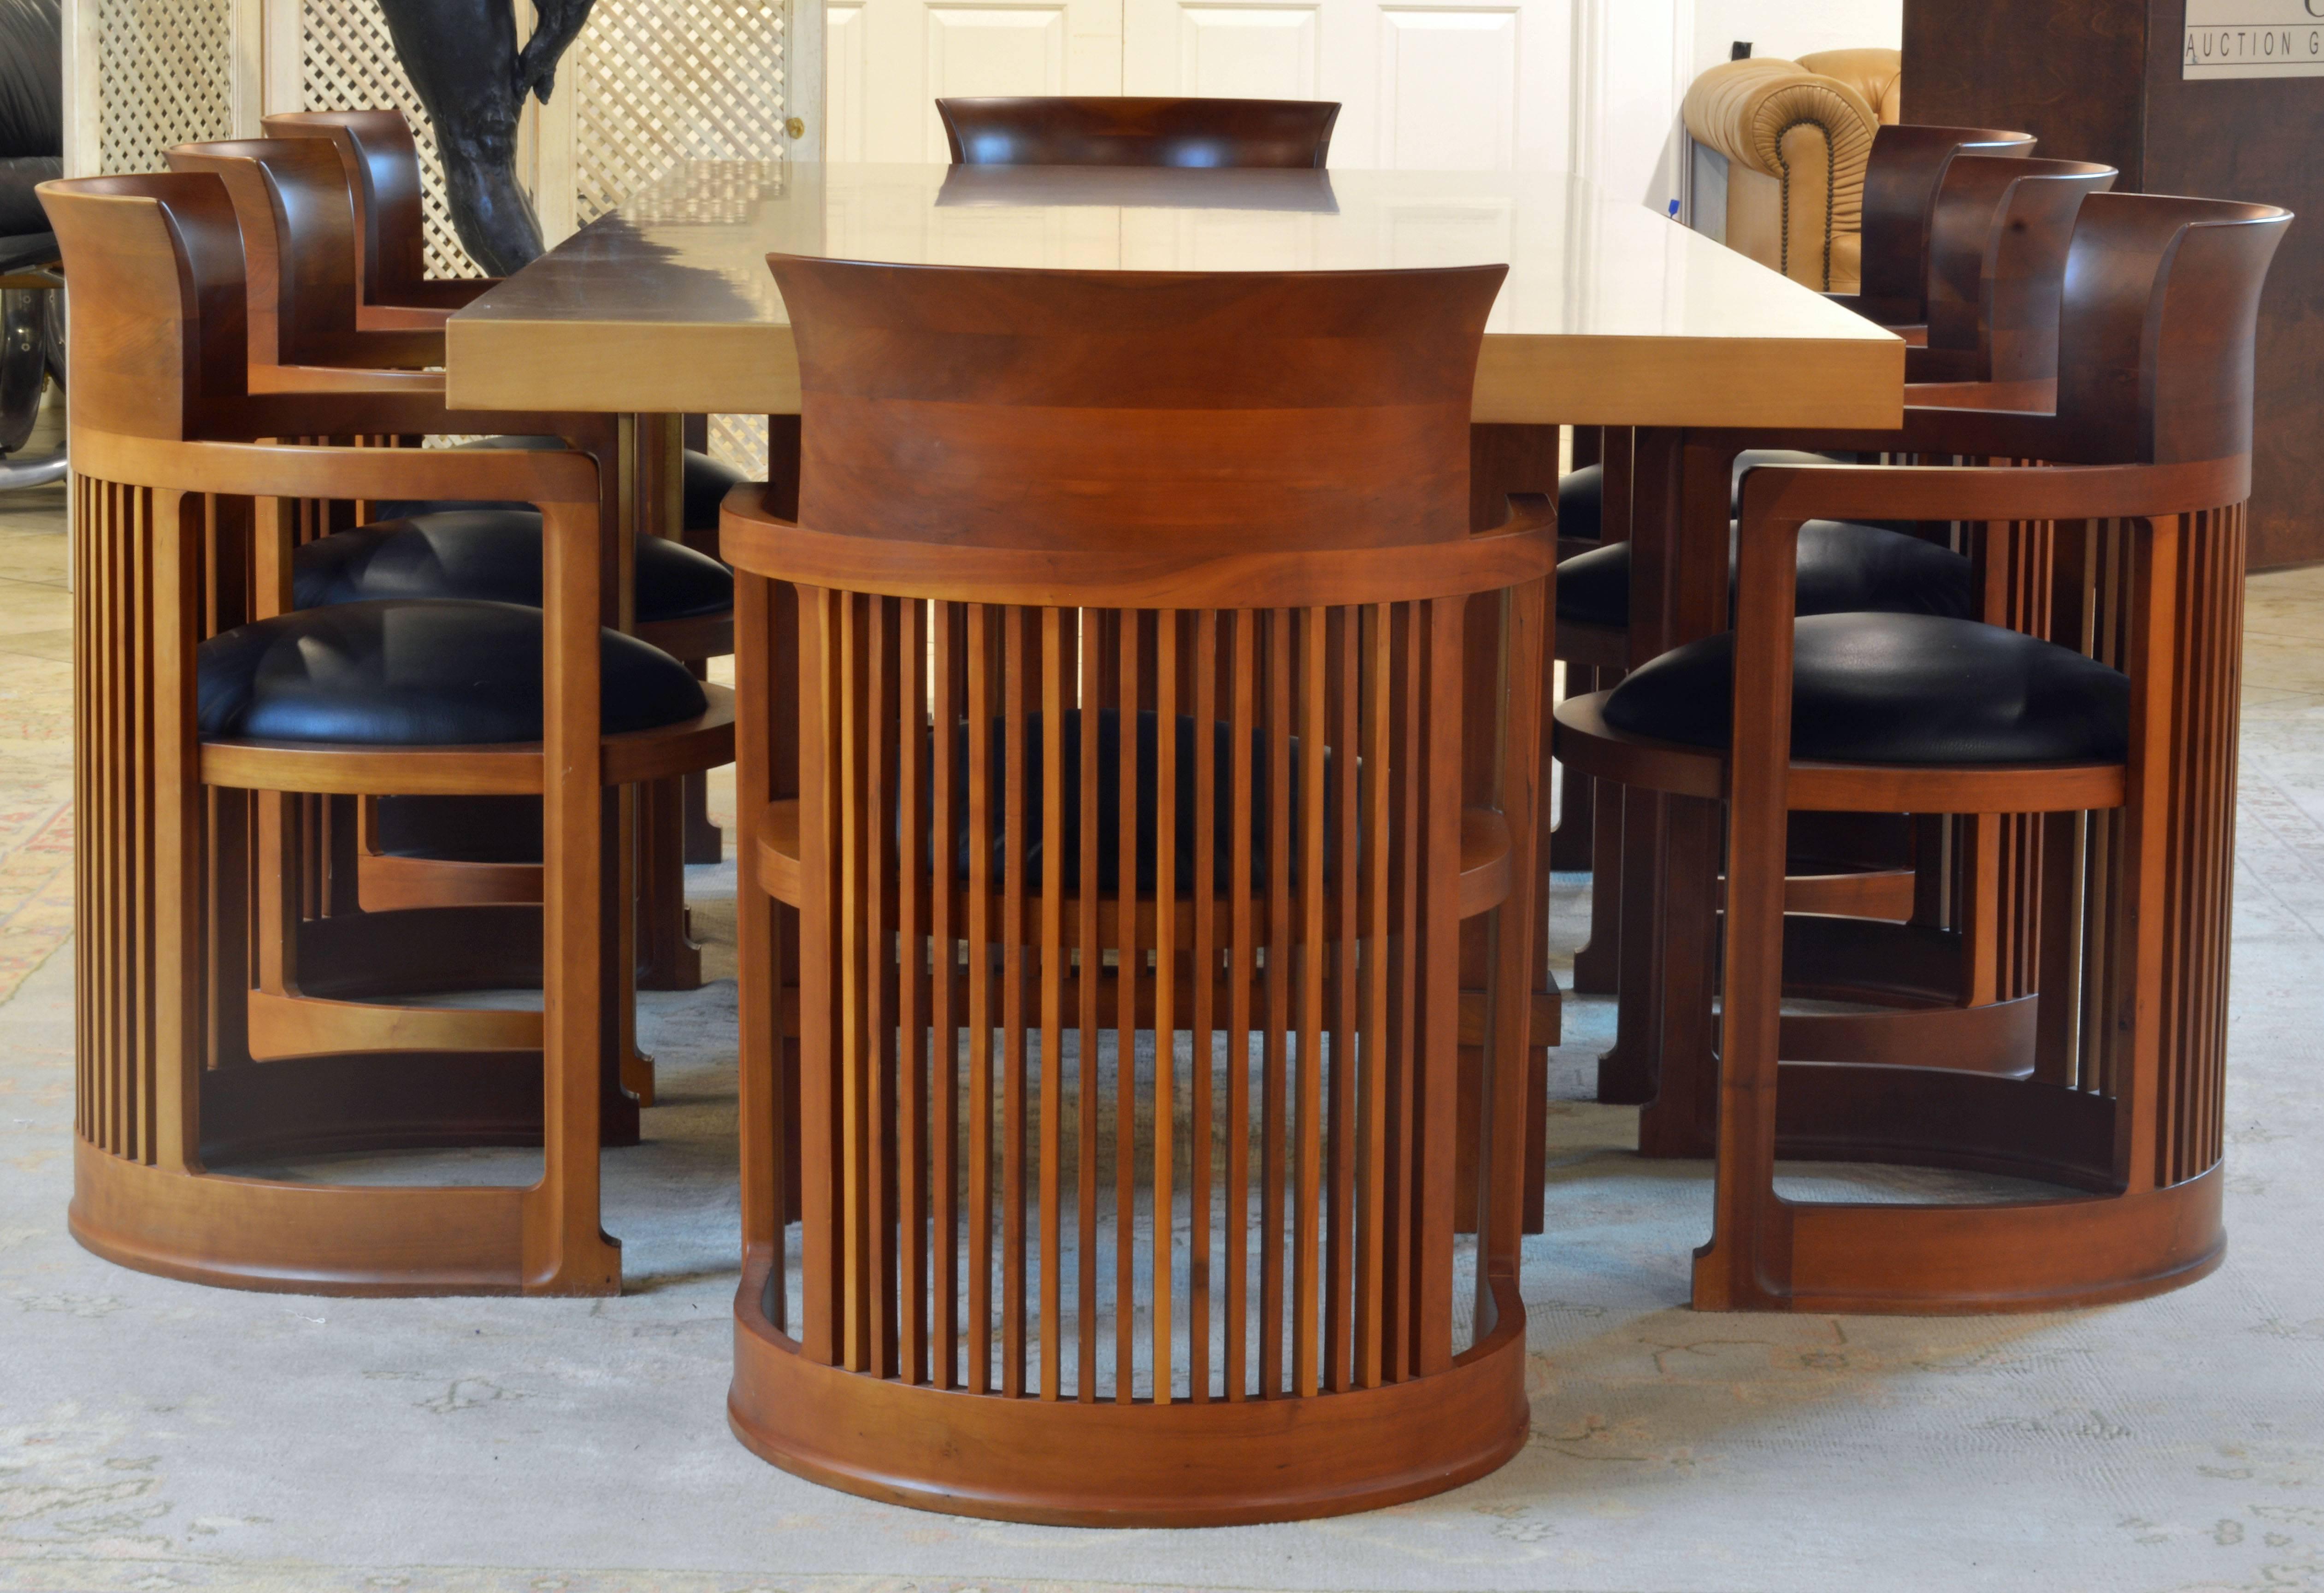 This group of Frank Lloyd Wright Taliesin inspired dining table and chairs are made in Italy and features high quality of craftsmanship and materials. Measurements: The table is 98.5 inches long, 38.5 inches wide and 29 inches high. The chairs are